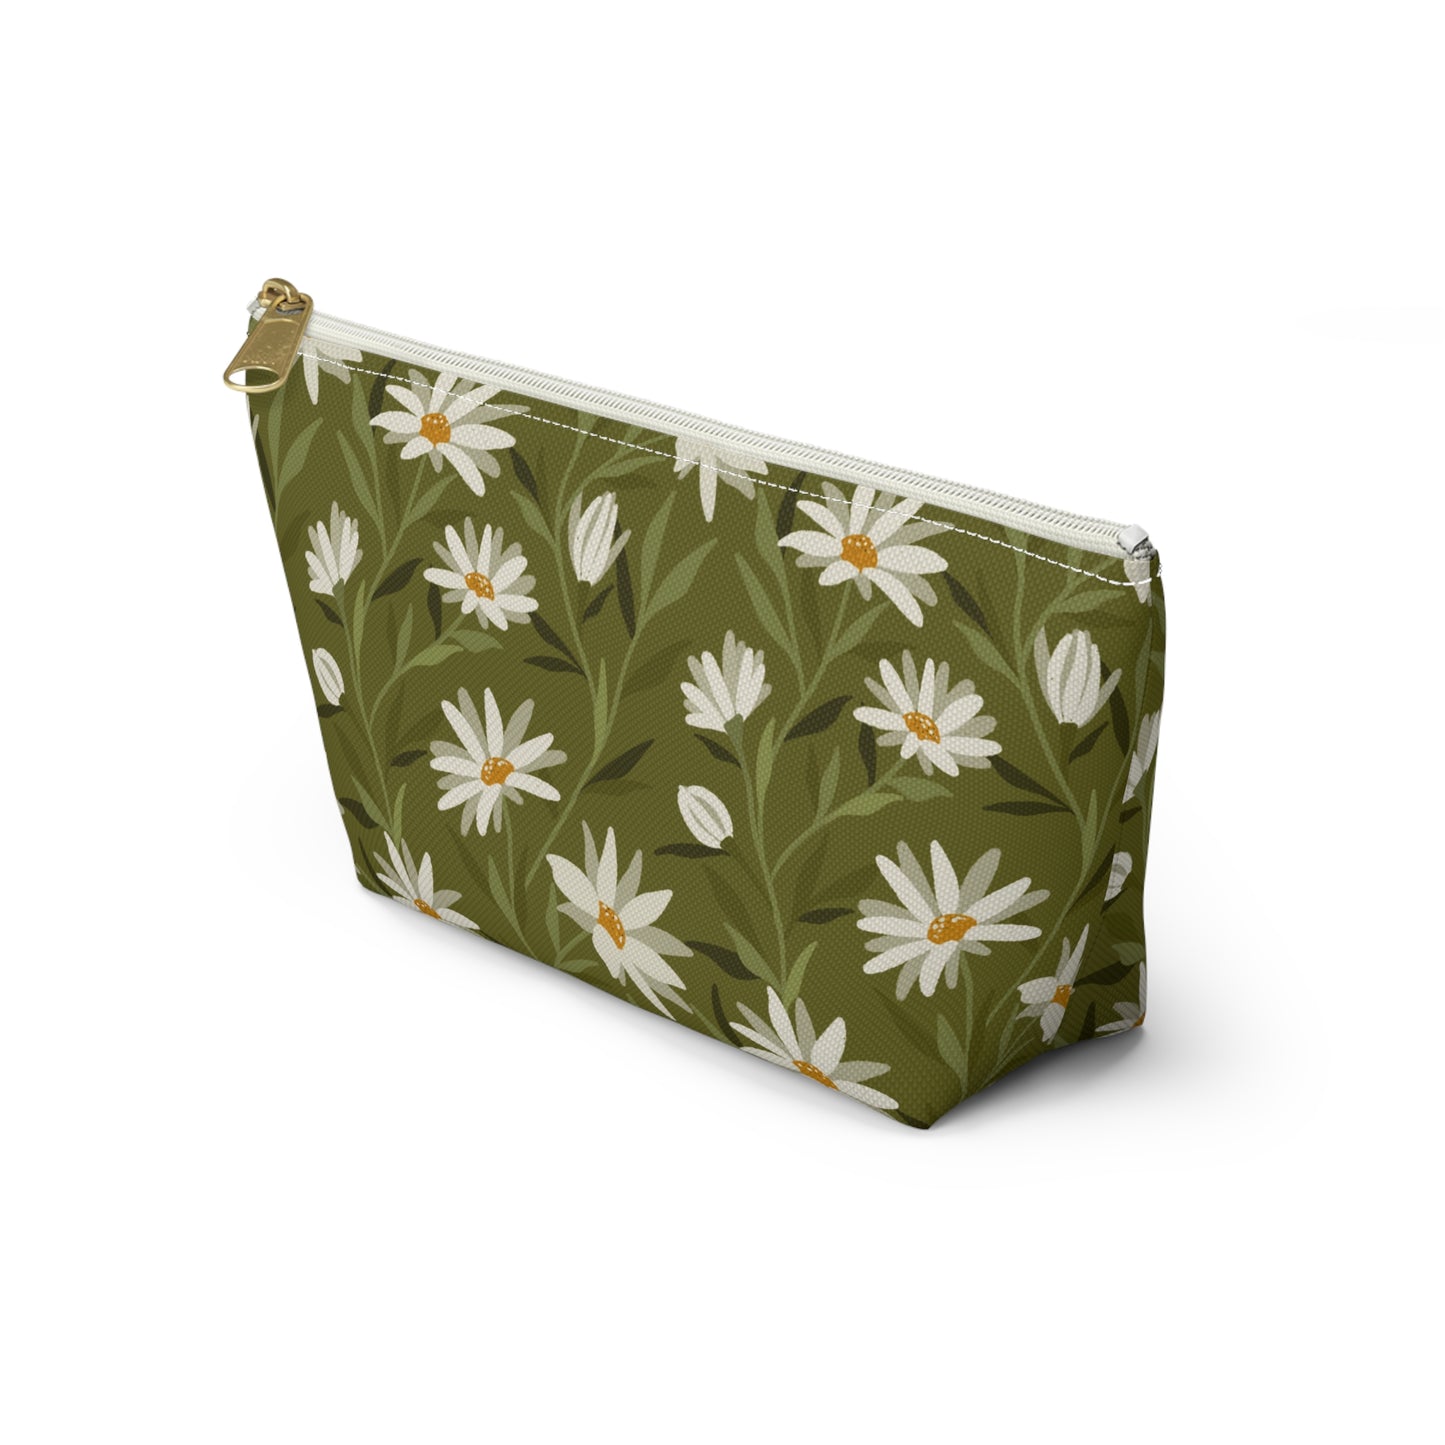 Zipper Pouch - Flowy Florals - green and white